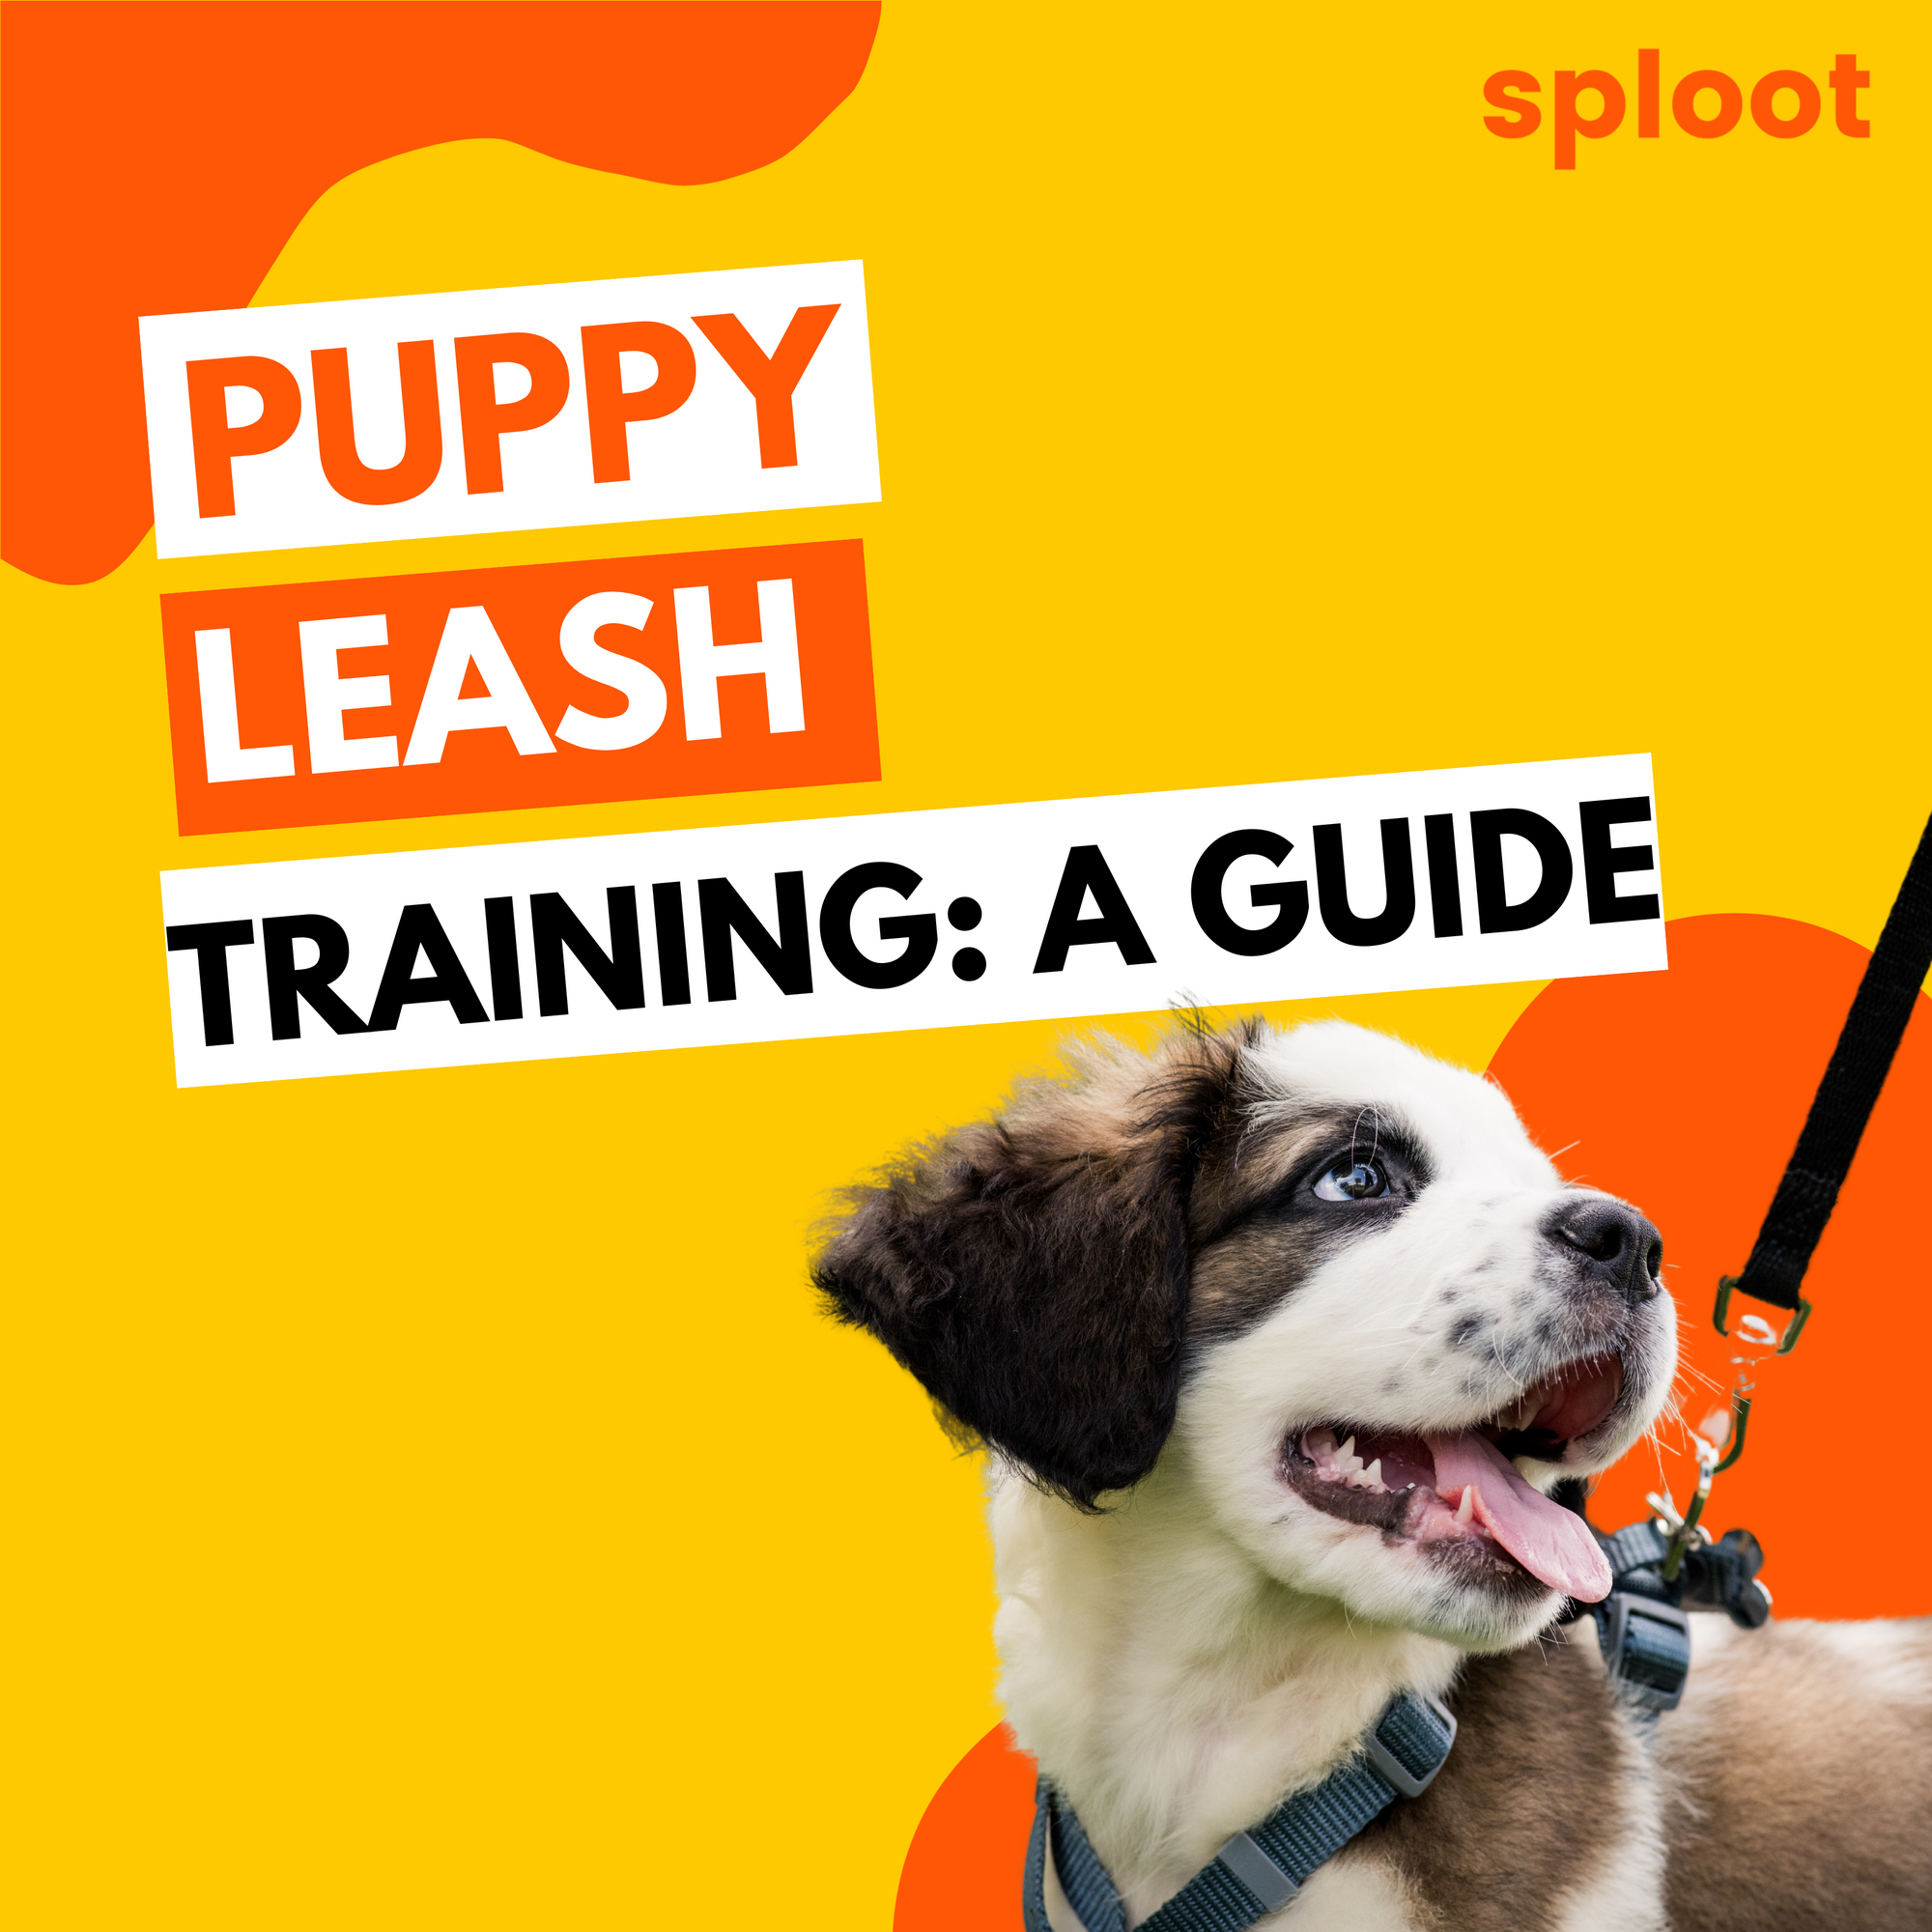 Puppy Leash Training: A Beginner’s Guide